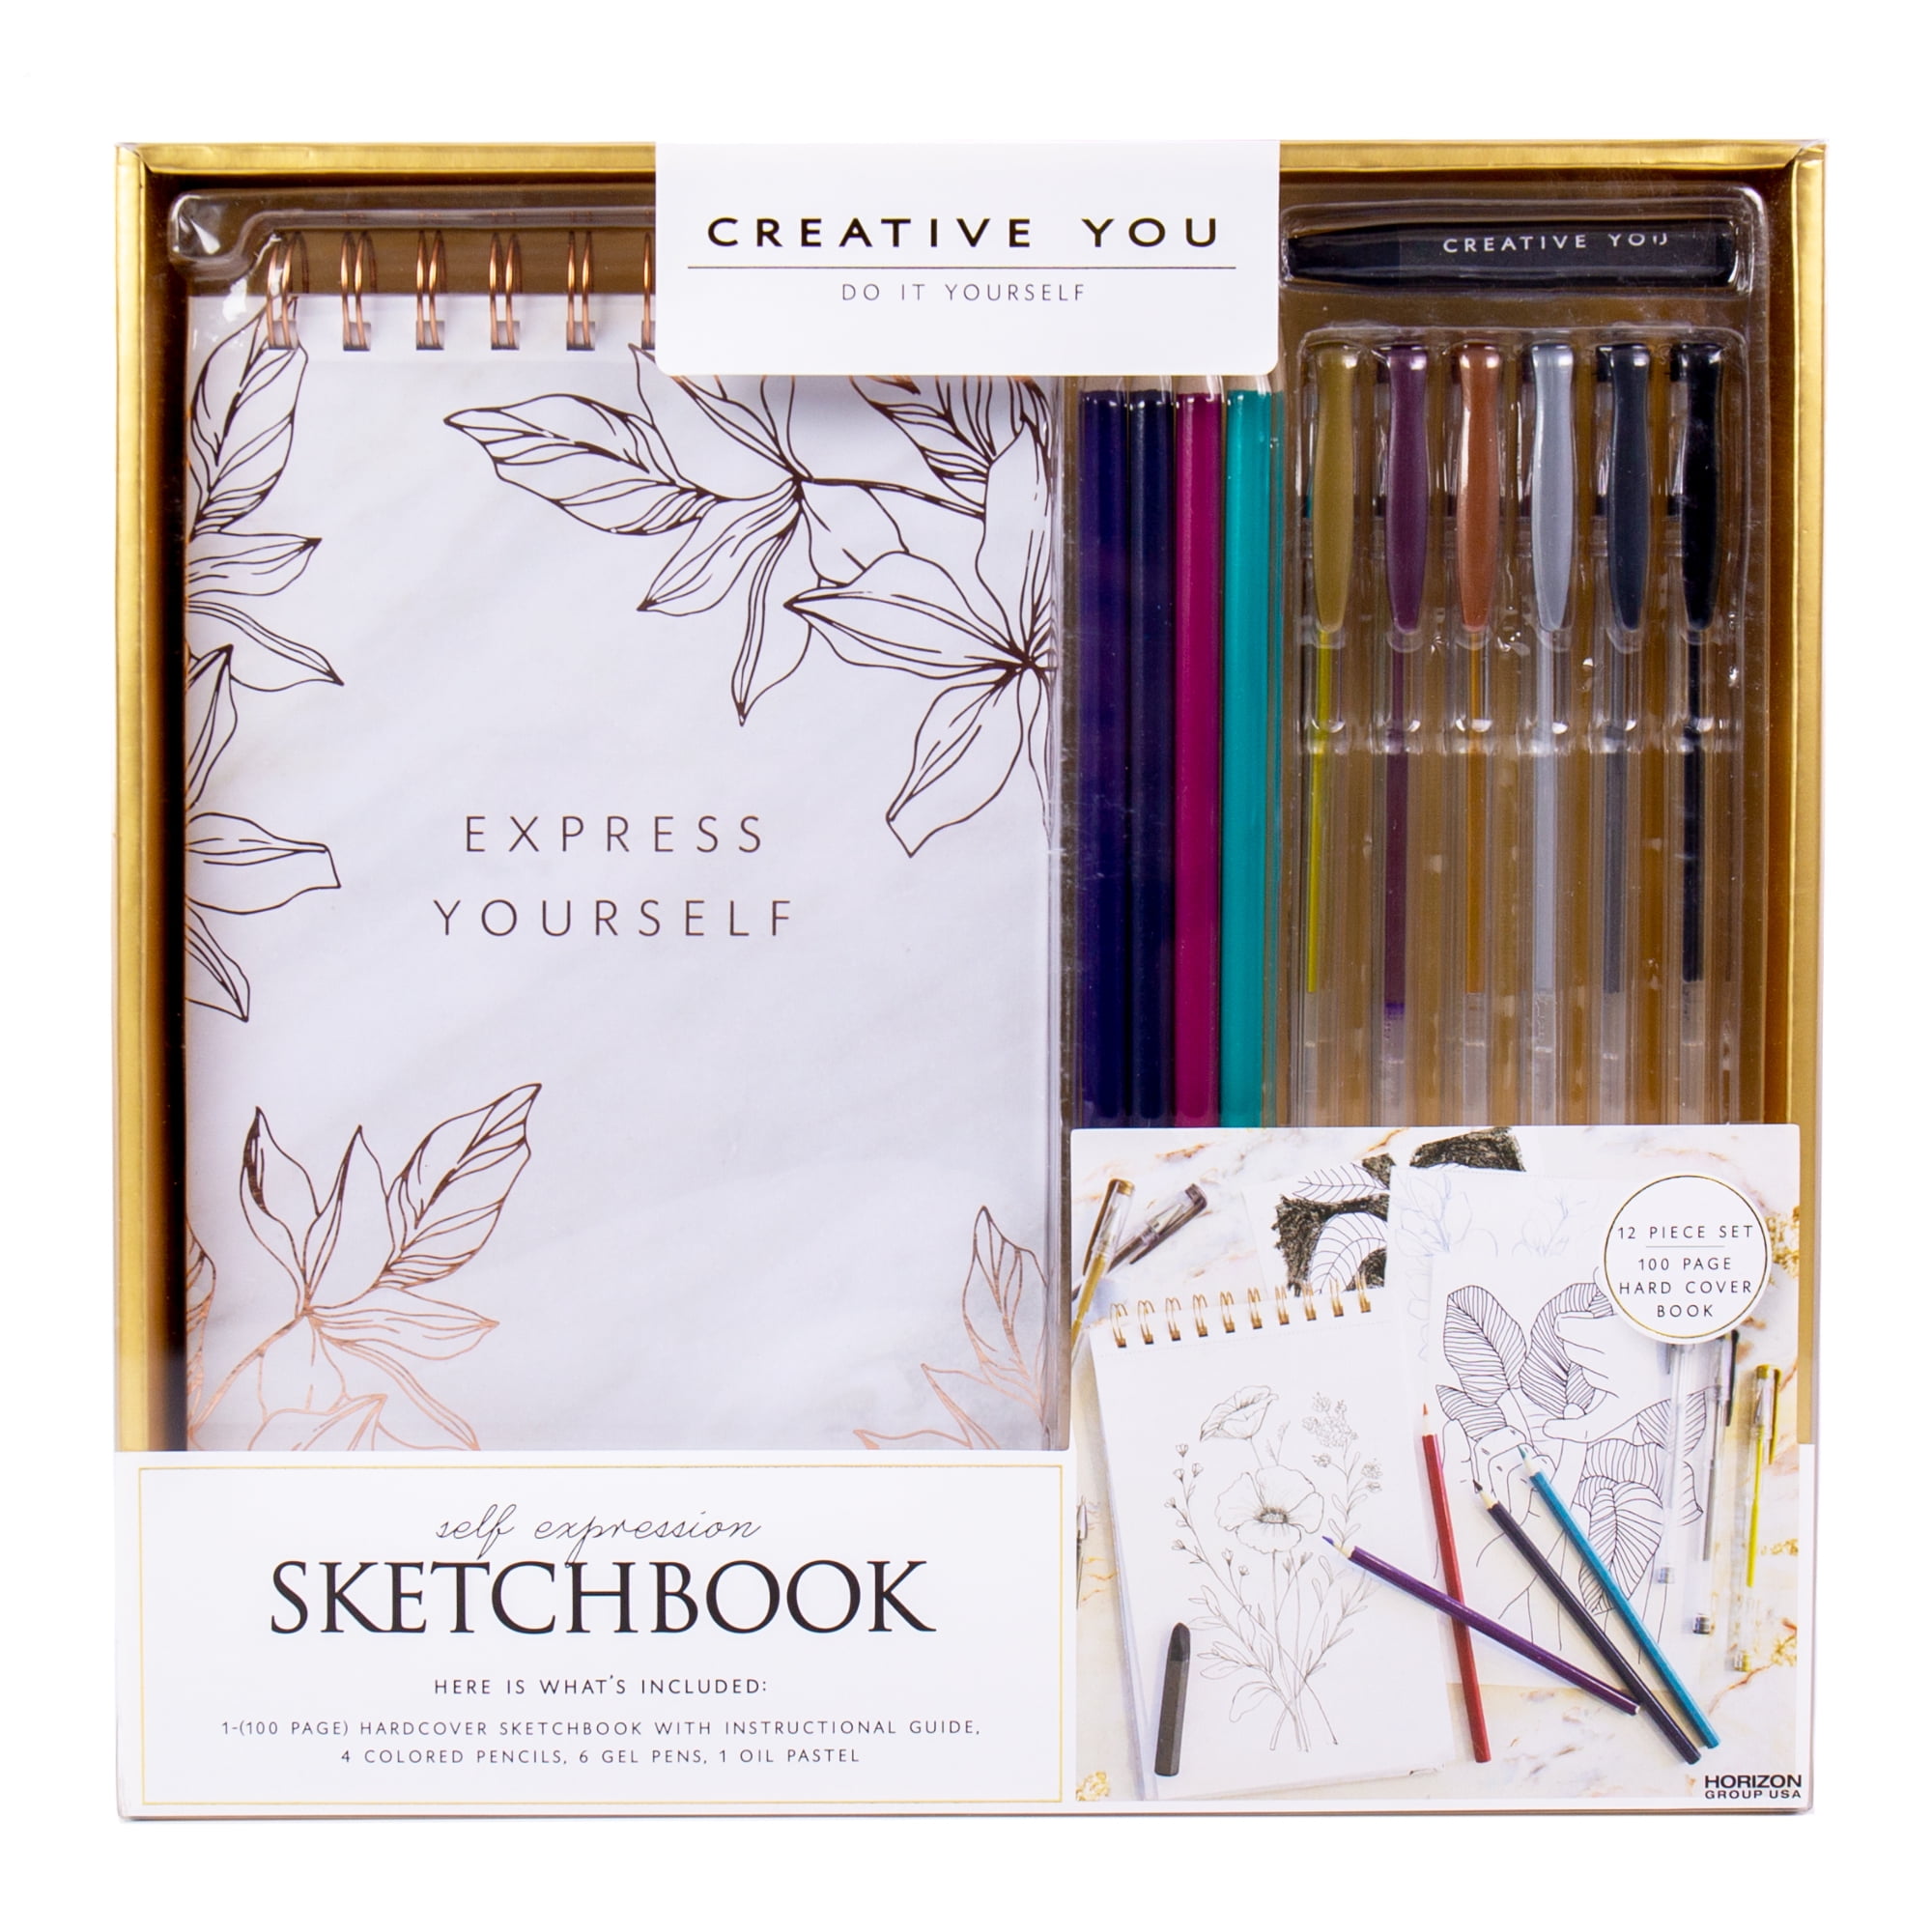 Express Yourself with A Wholesale waterproof sketchbook from